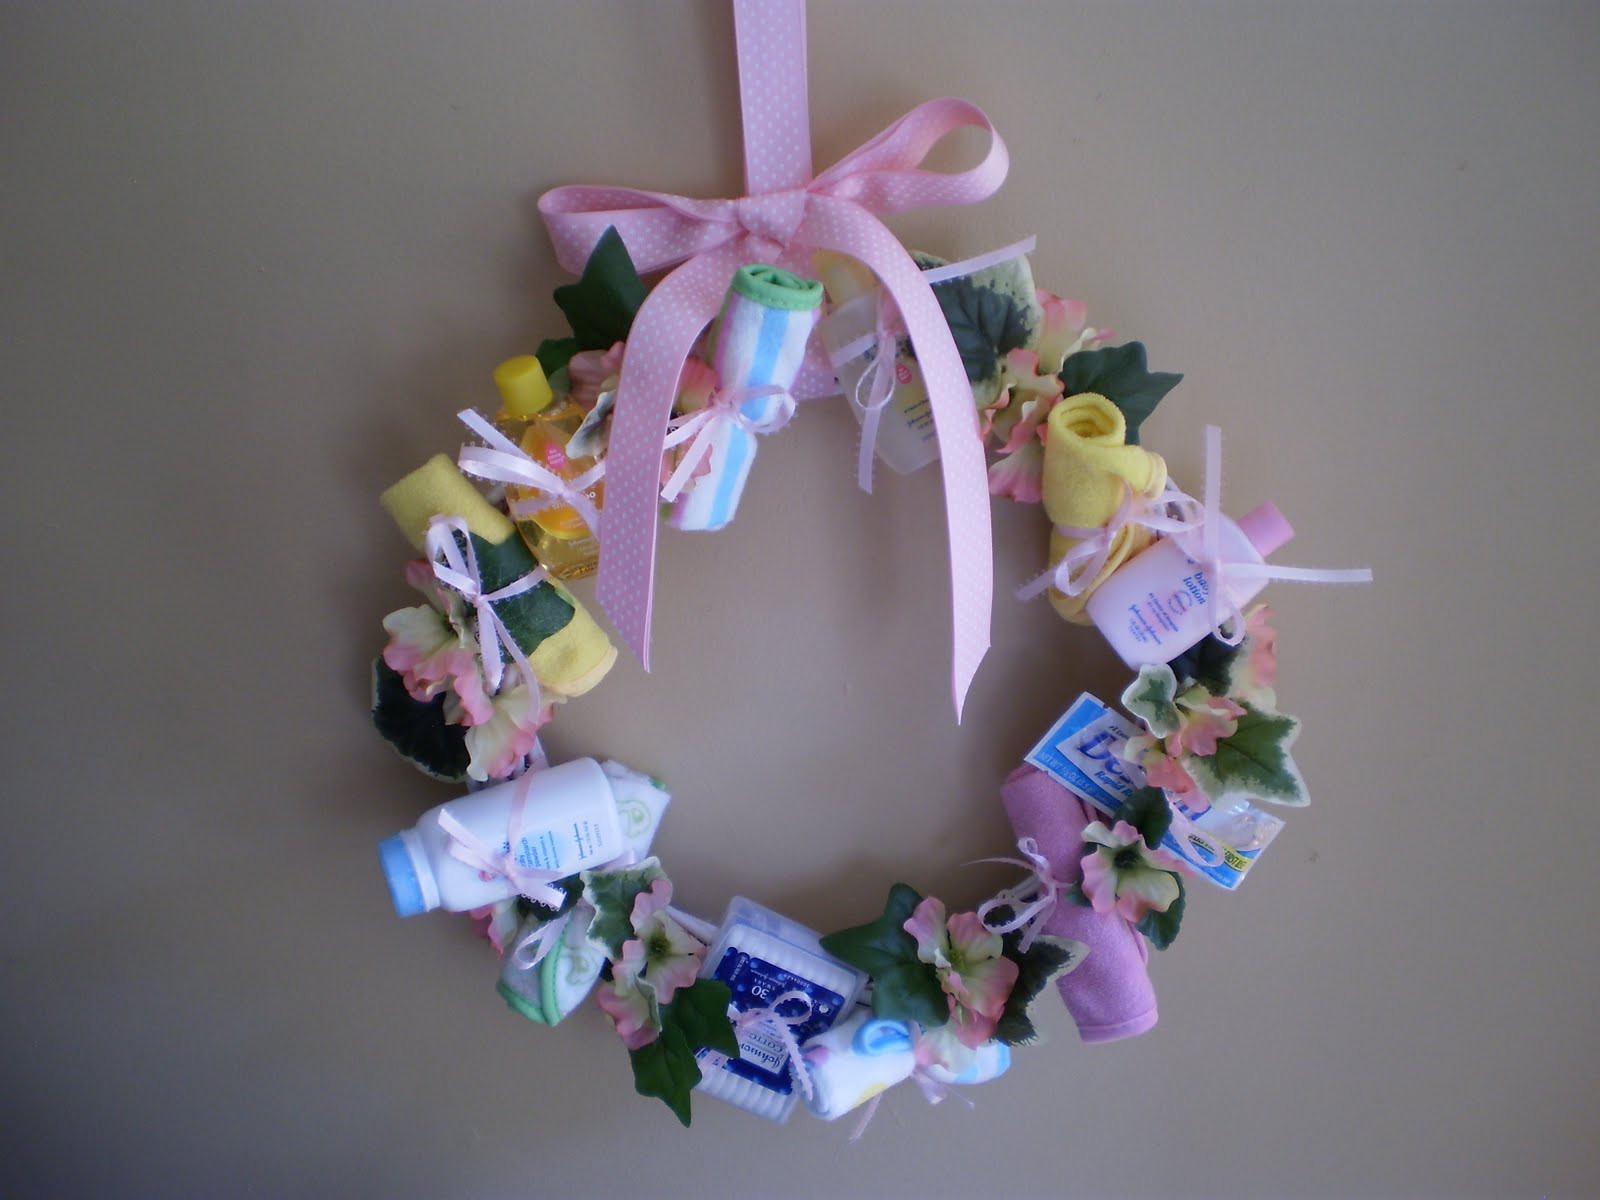 Keepsake Baby Shower Gifts
 e Simple Country Girl A Neat Baby Shower Gift Idea